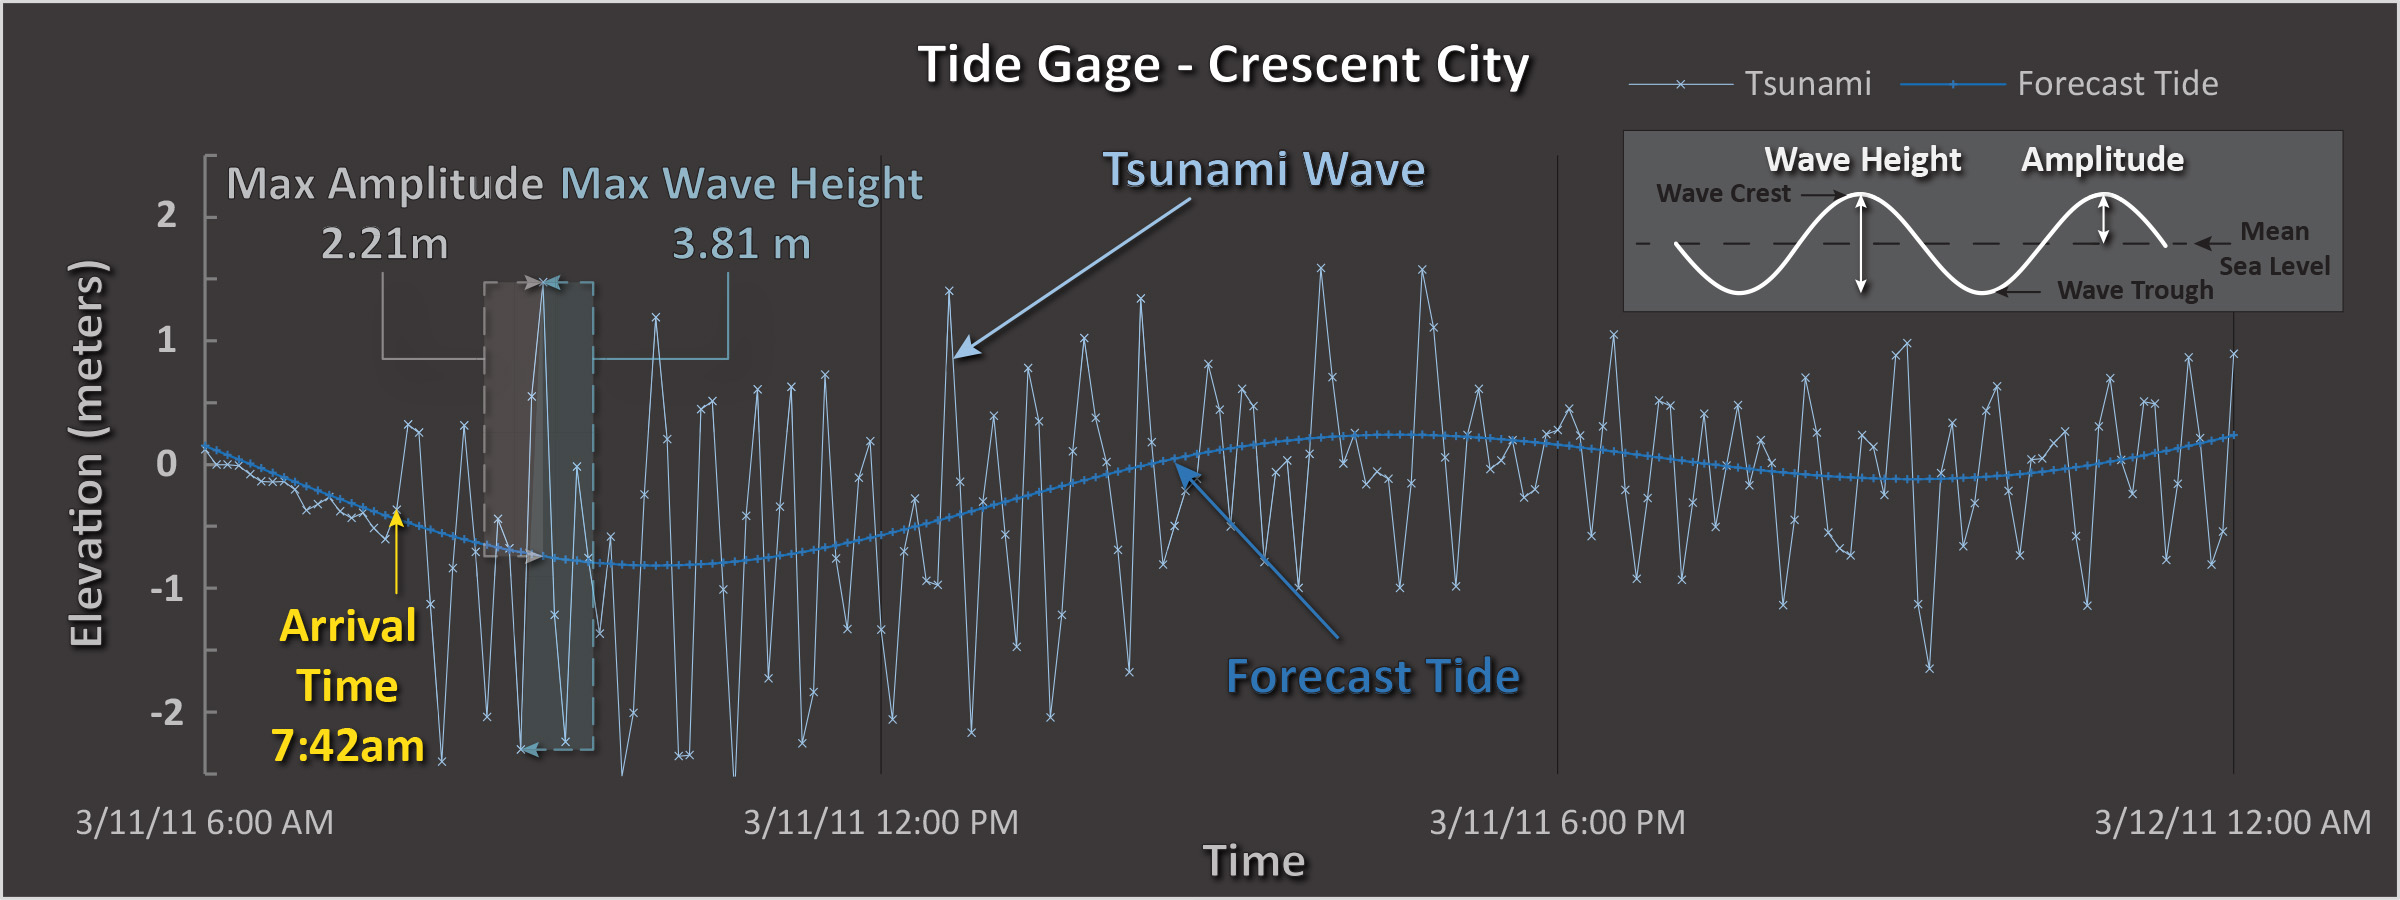 Tide gage data and tide forecasts from Crescent City, California are plotted as a light blue and dark blue lines respectively. A legend shows the difference between wave height and amplitude. The tsunami arrival time to Crescent City and the maximum amplitude and wave height in Crescent City are all labeled.